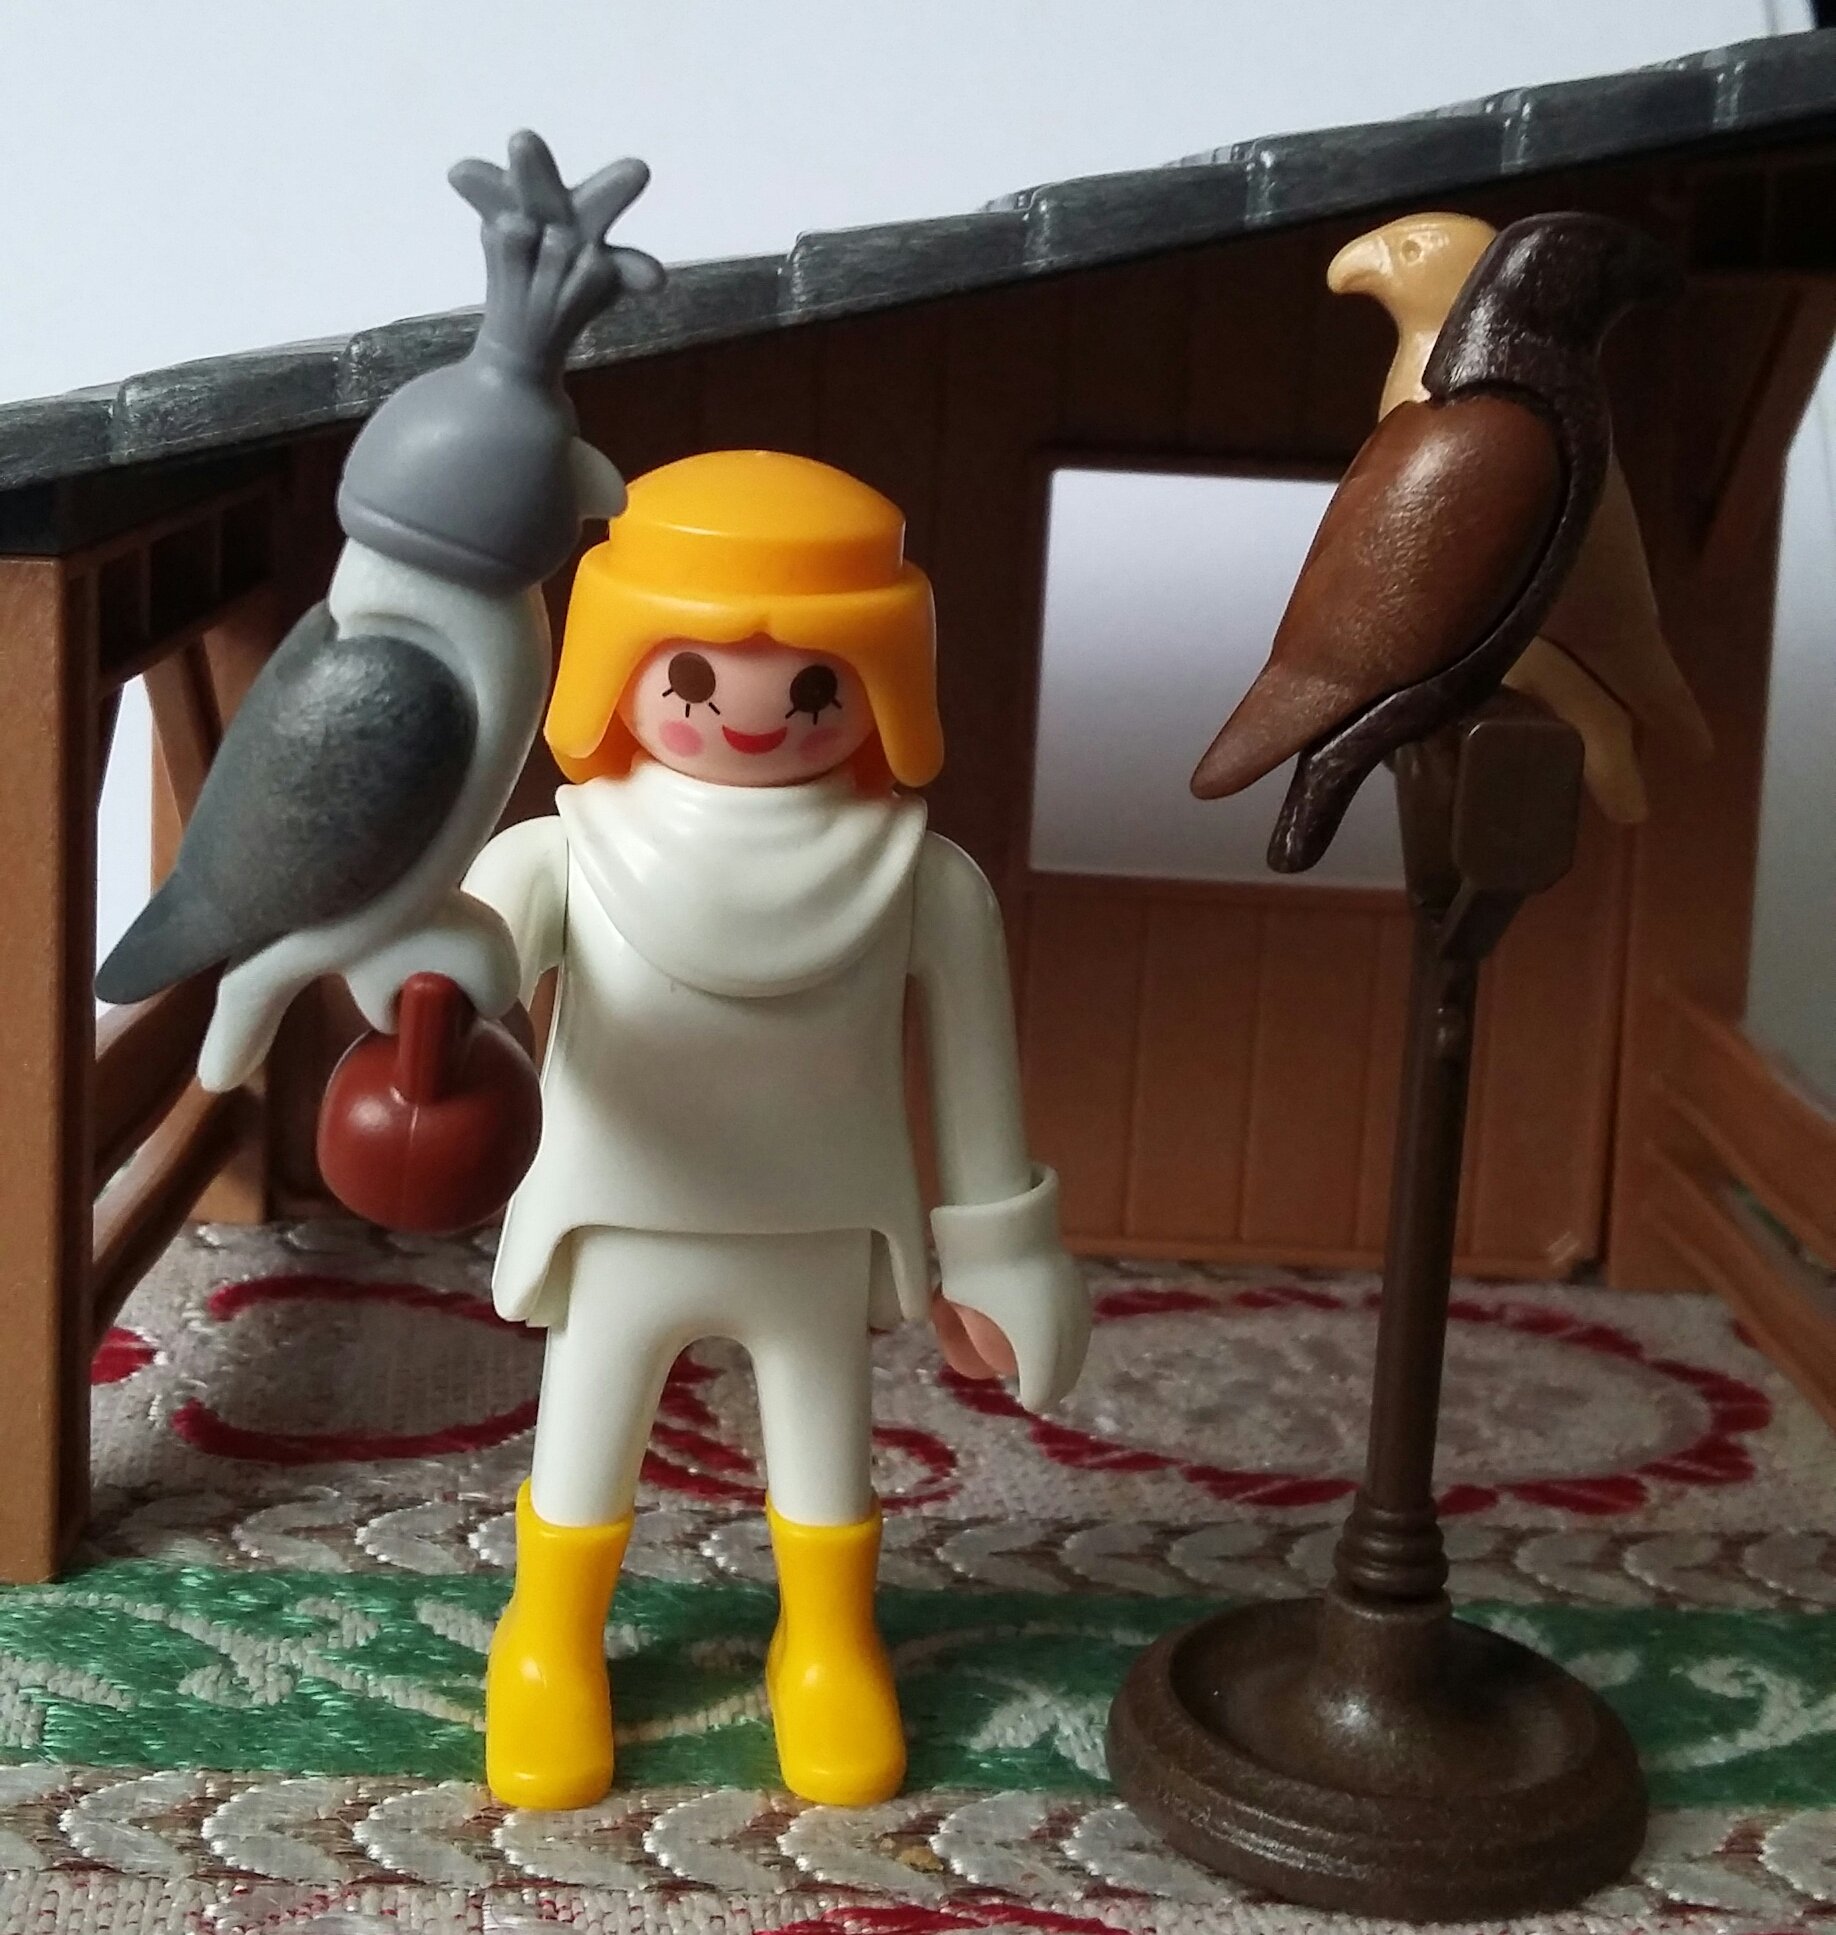 Geo_Workshop on Twitter: "Playmobil 6471 #falconry with adaption:  replacement of bearded male falcolner figure 2 celebrate female falcolners  past &amp;present #ErOutdoors https://t.co/EswfriagyE" / Twitter